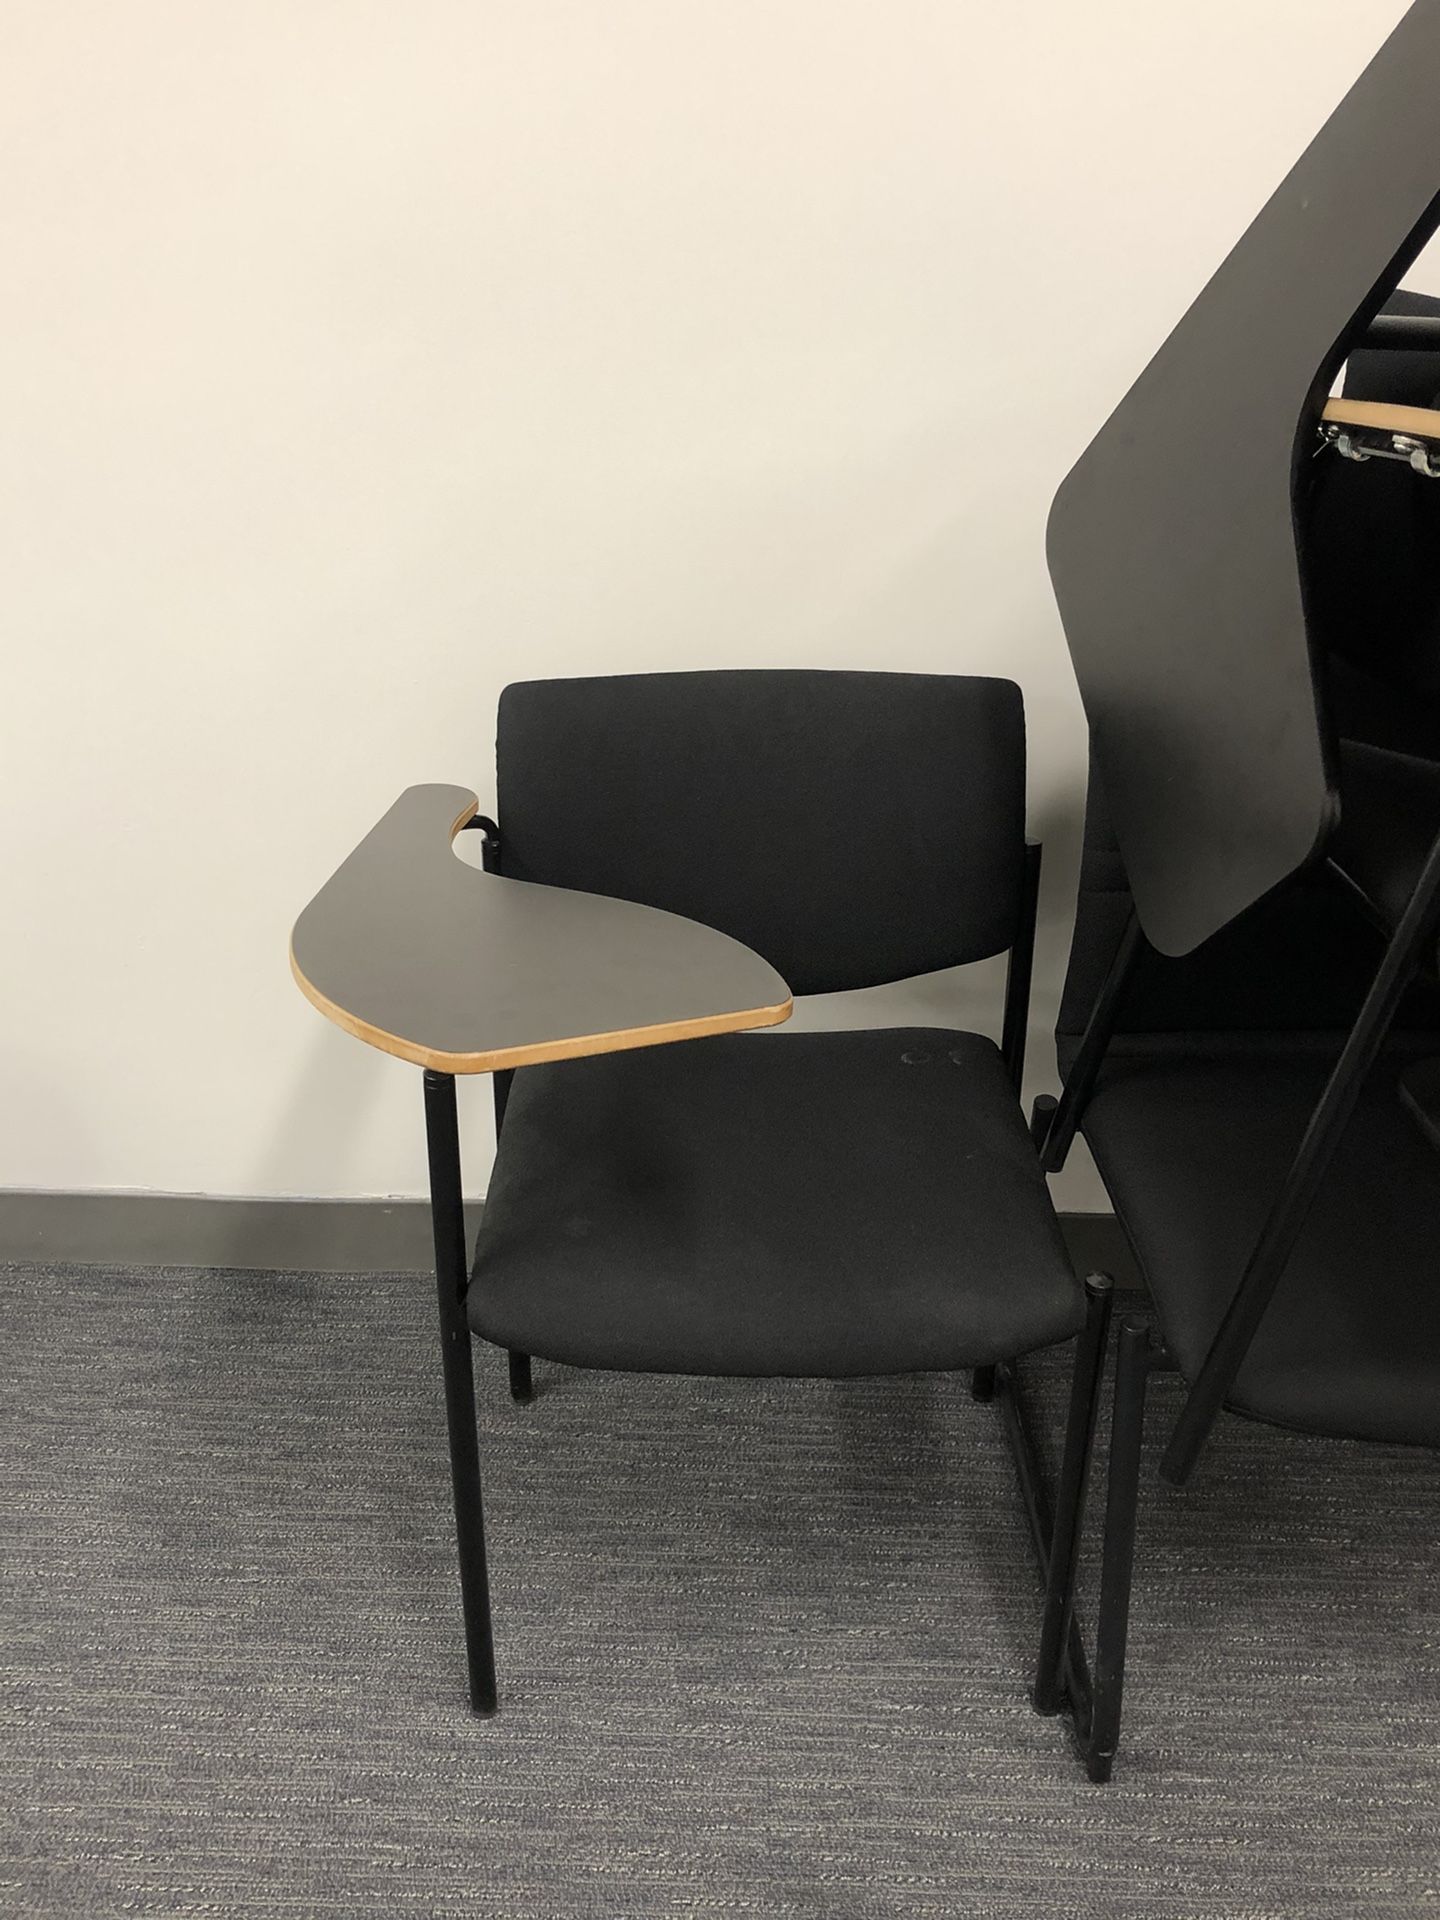 FREE 10 desk chair ready for pick up